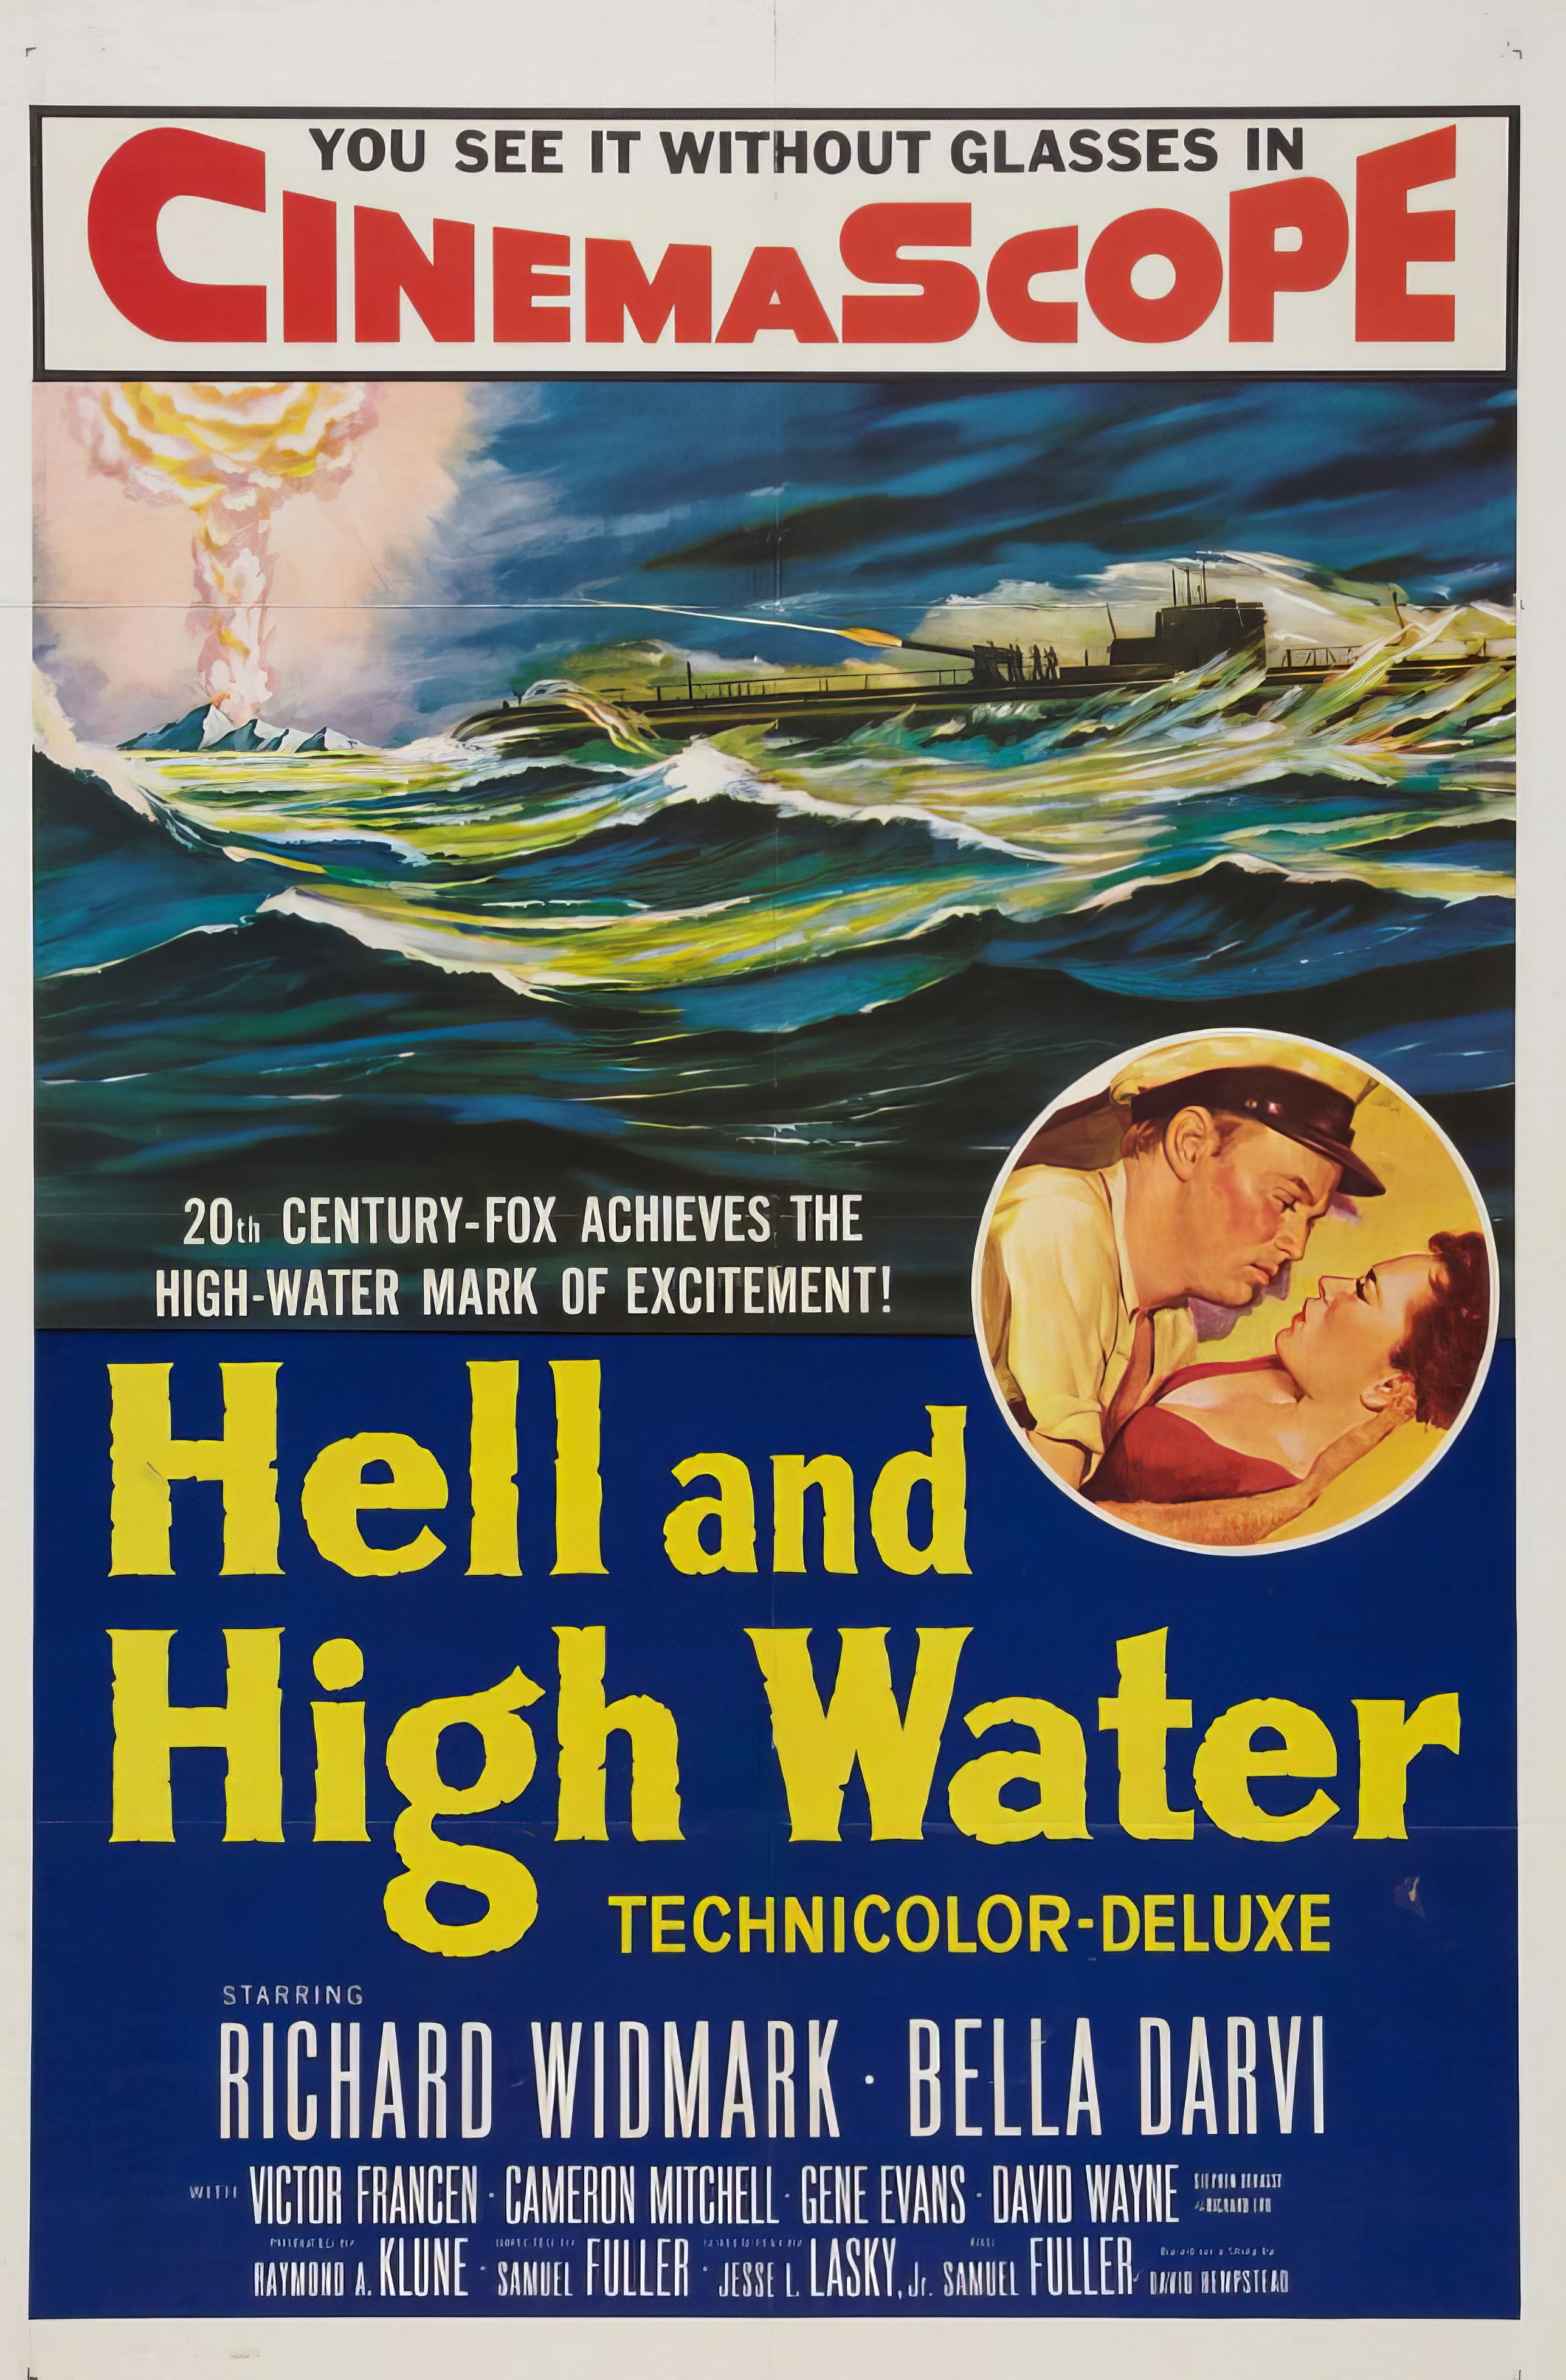 Hell and High Water (1954) - HD BRrip 720p